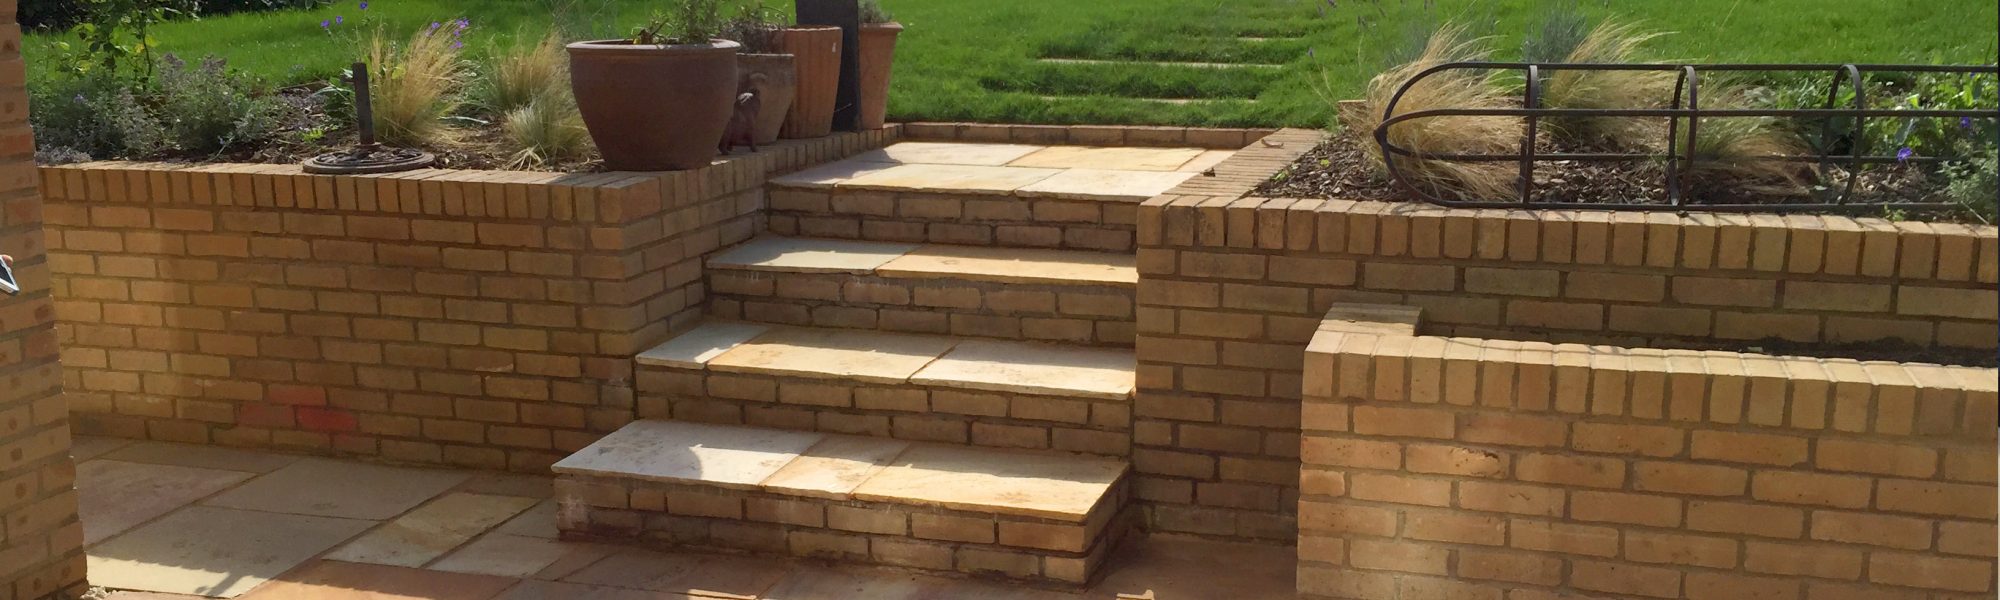 Retaining wall with planters and steps leading from slabbed patio to garden